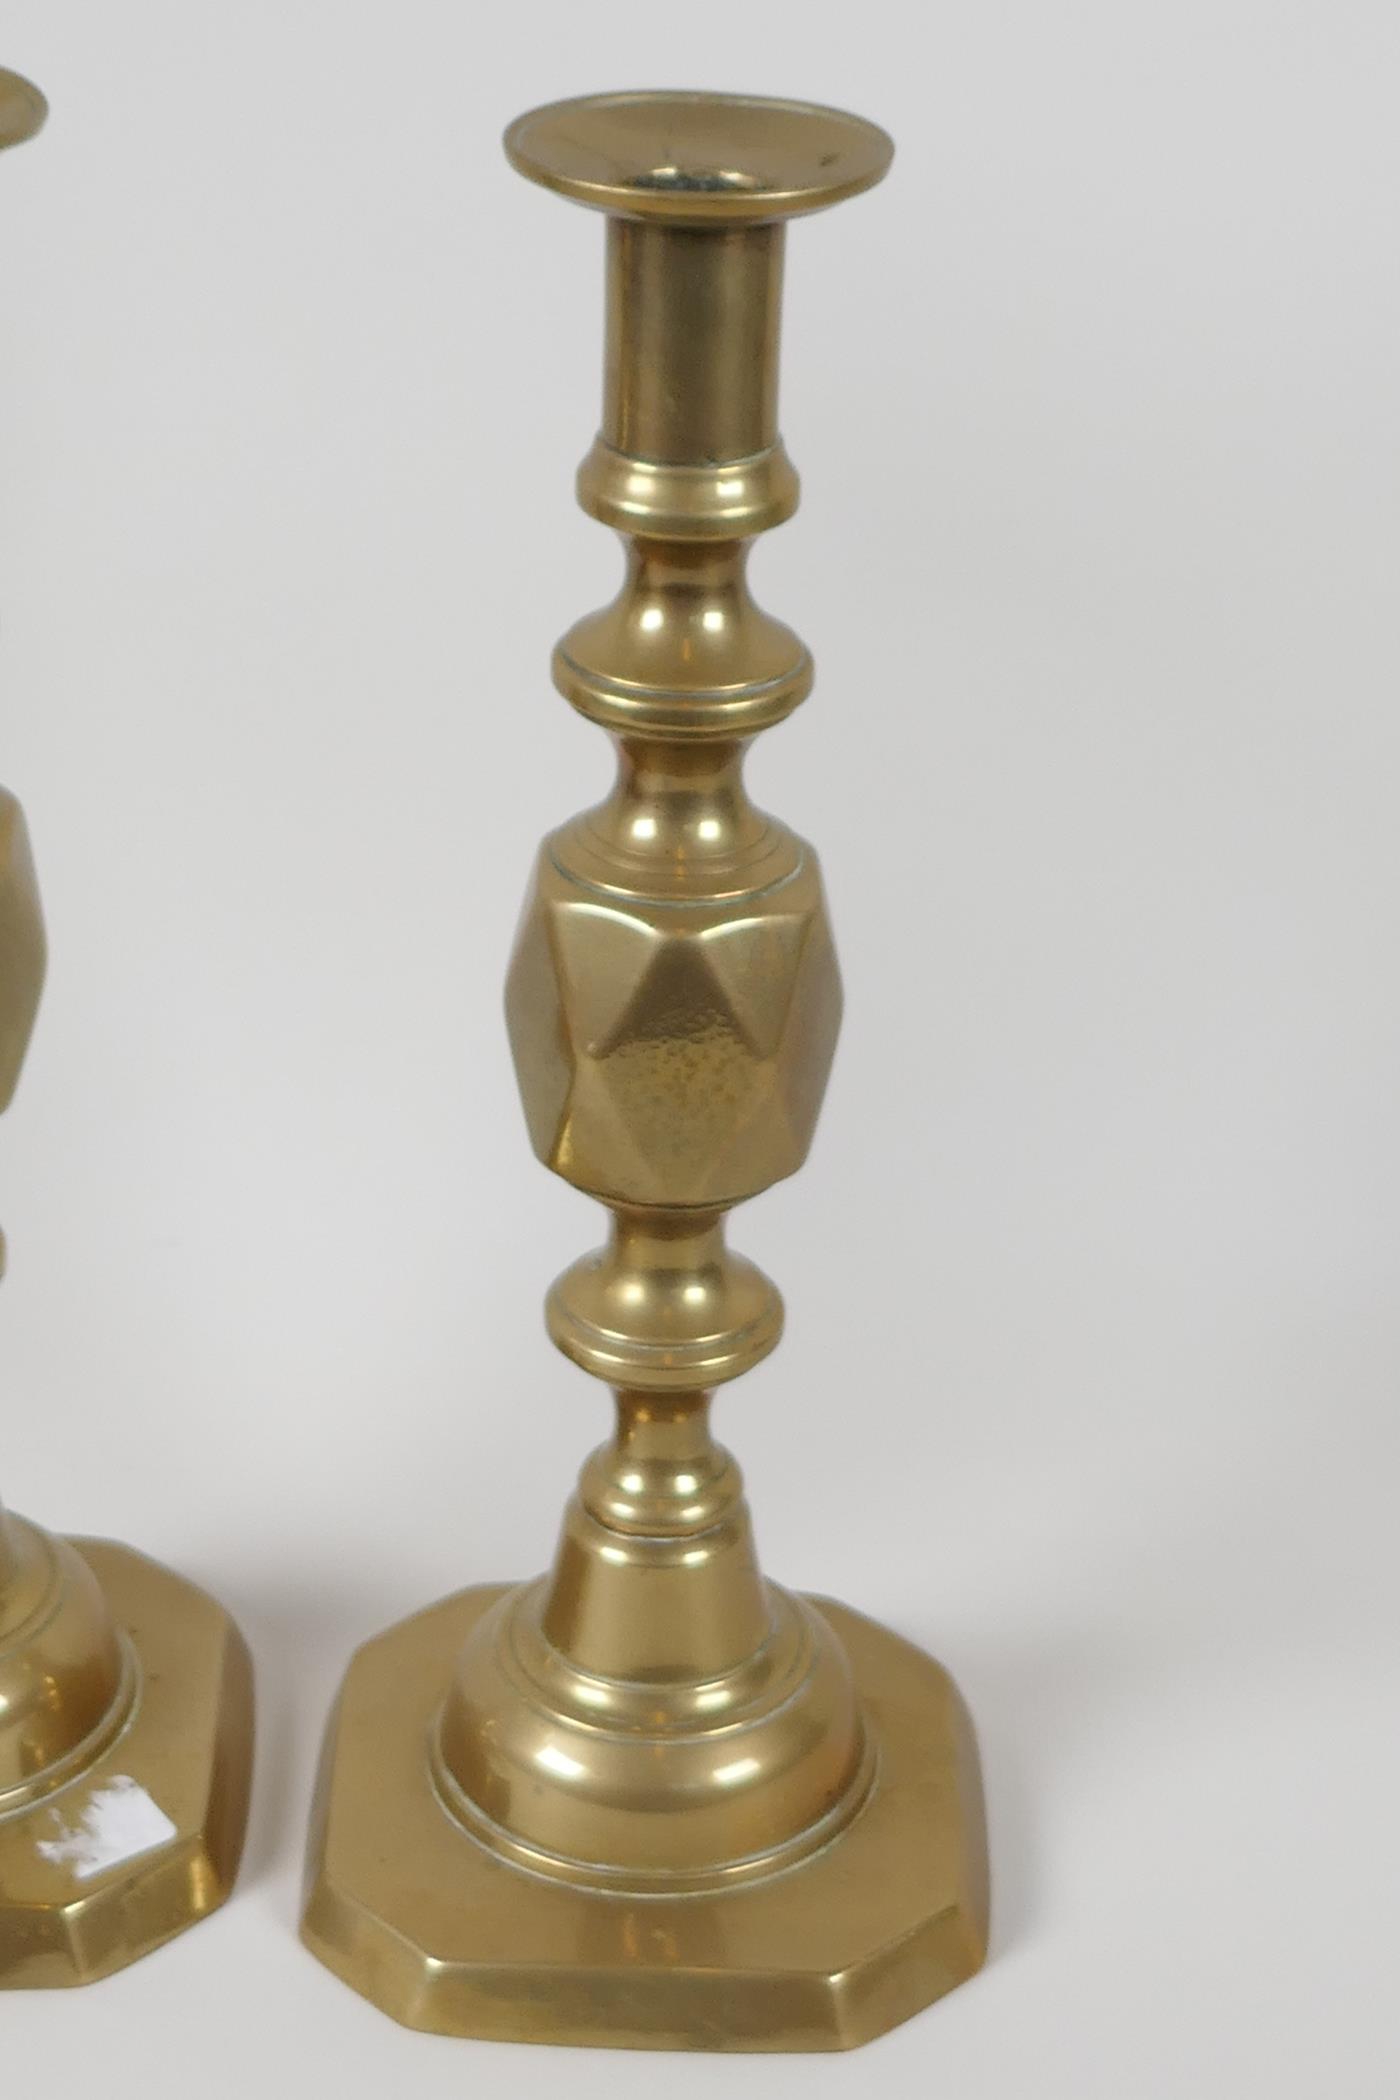 A pair of C19th brass "The Queen of Diamonds" pattern candlesticks, 11½" high - Image 2 of 2